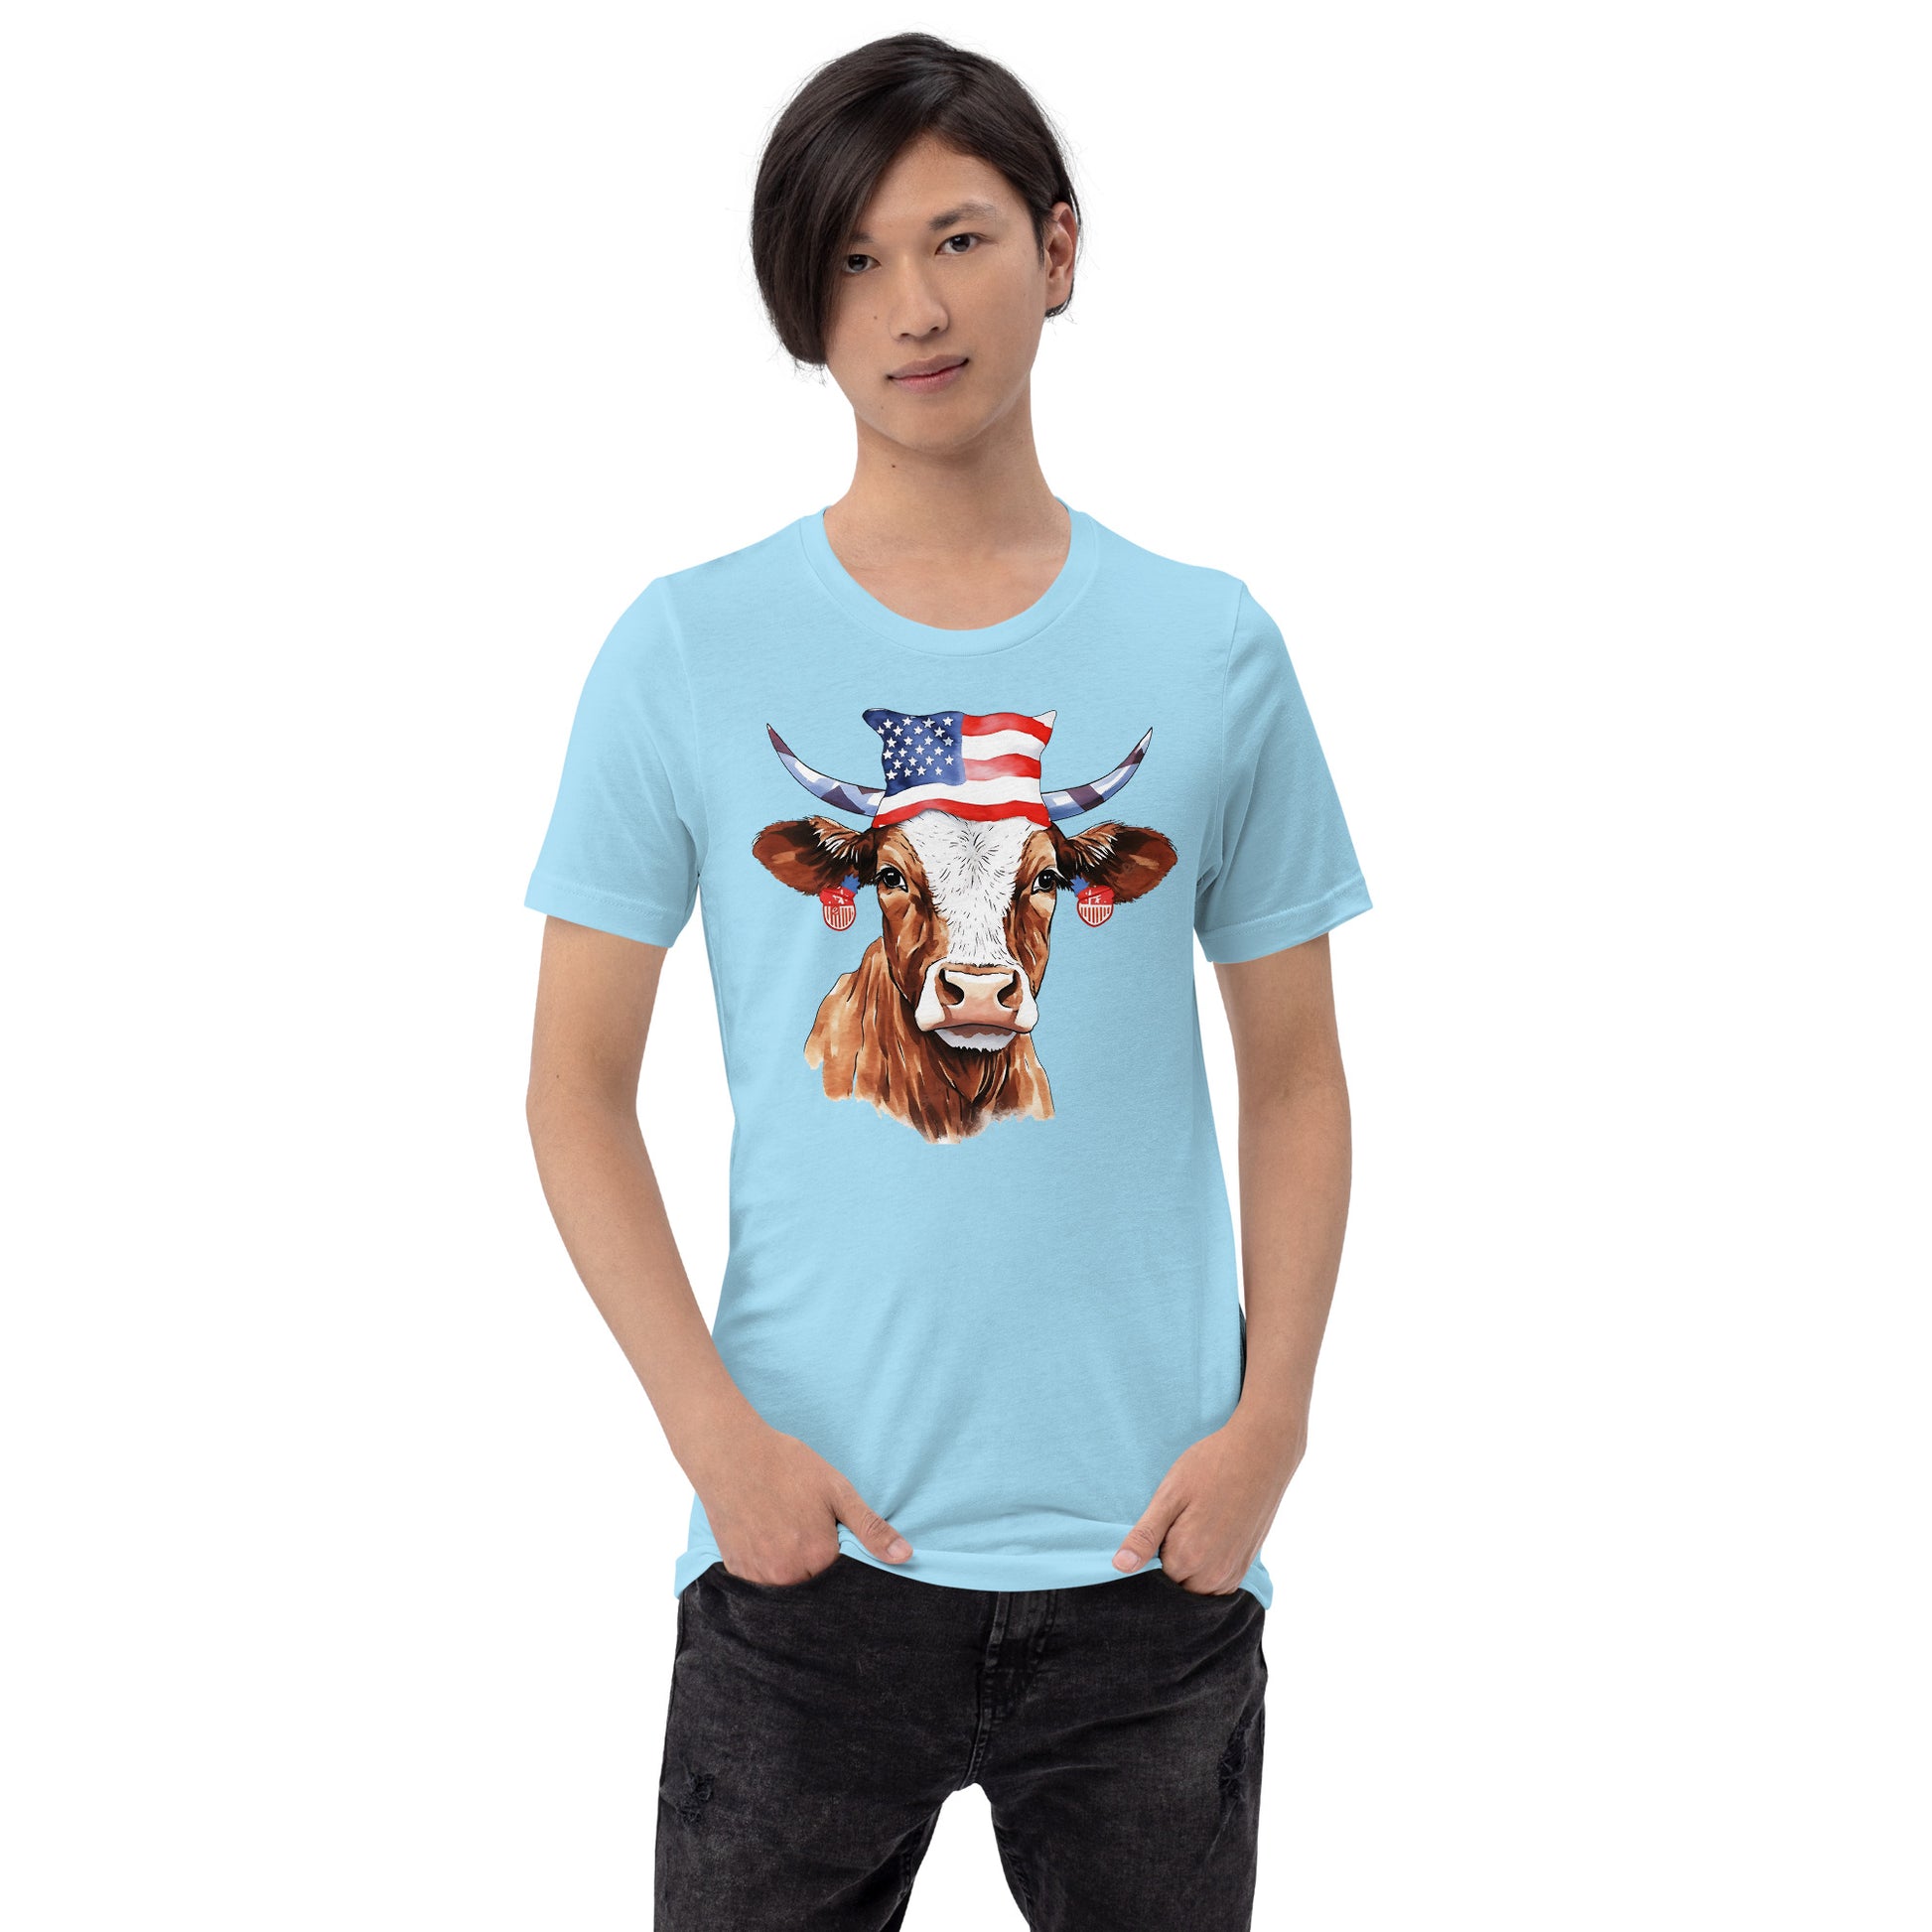 Patriotic Cow Tshirt For Cow Lovers Blue Color